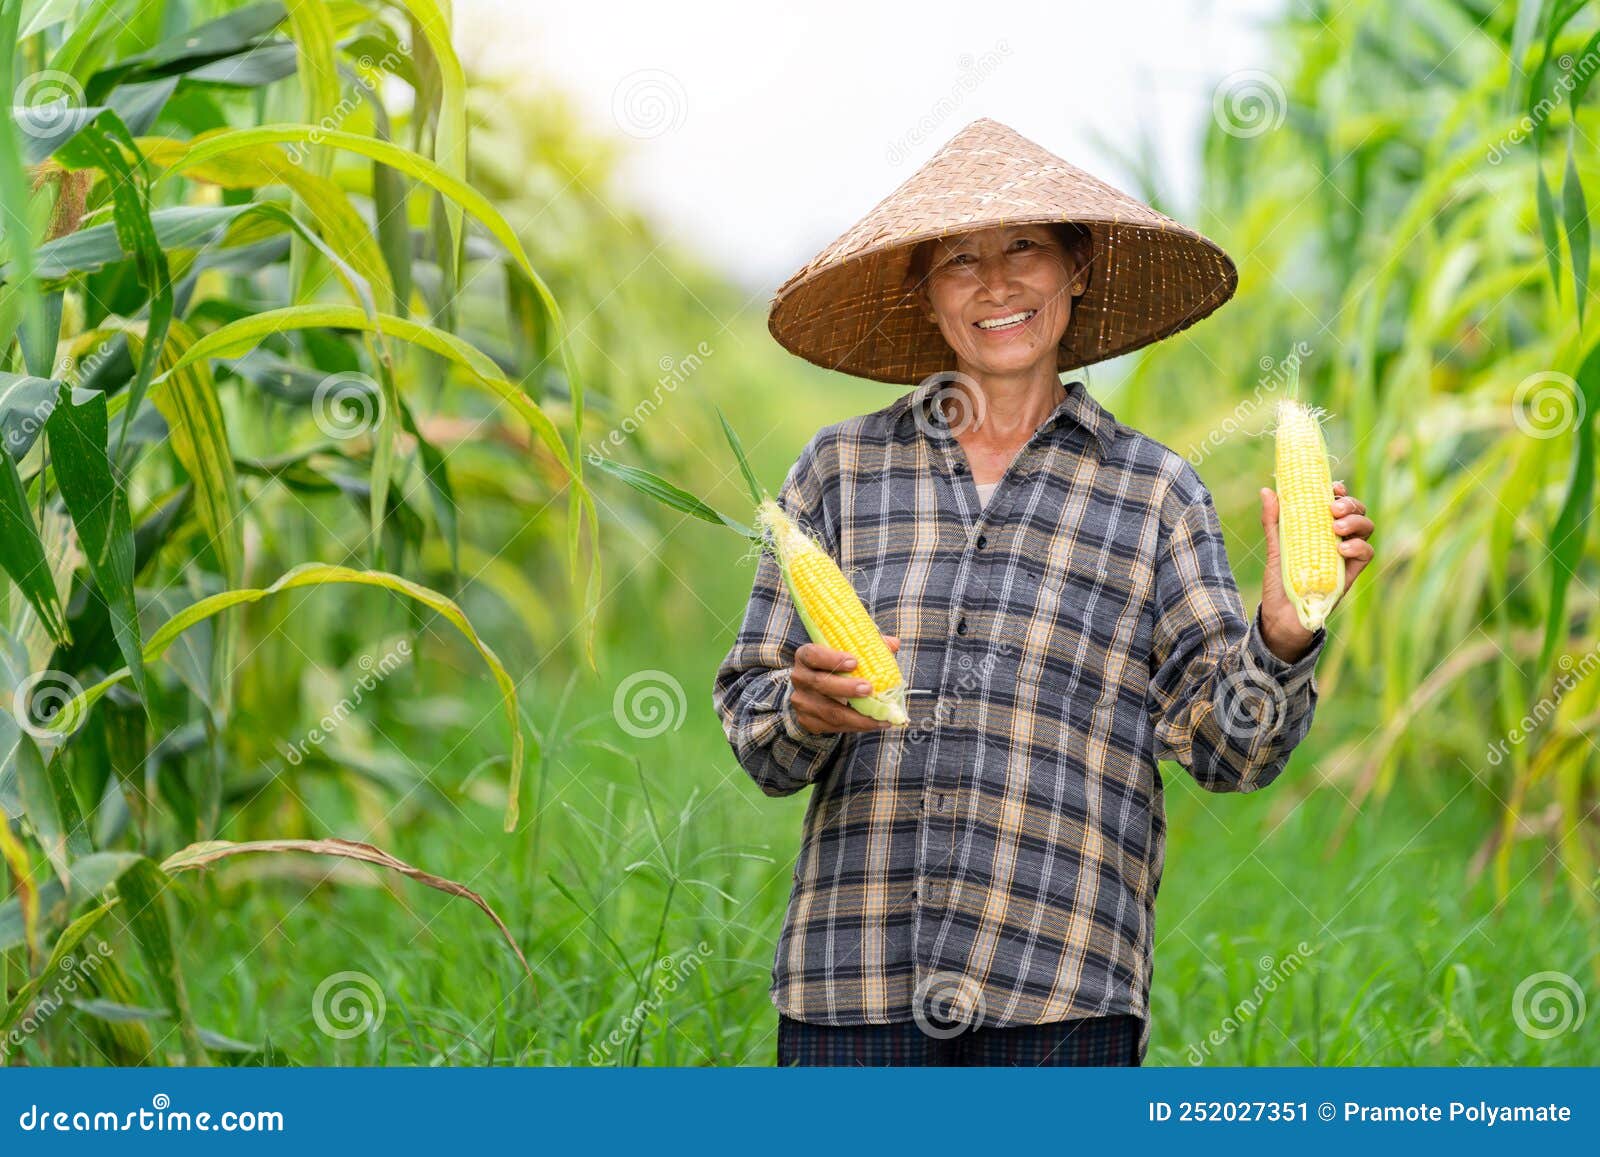 Asian Farmer Harvesting Sweetcorn during and Show the Perfect Corn Result  the Agricultural Season at Corn Field Stock Image - Image of harvest, corn:  252027351